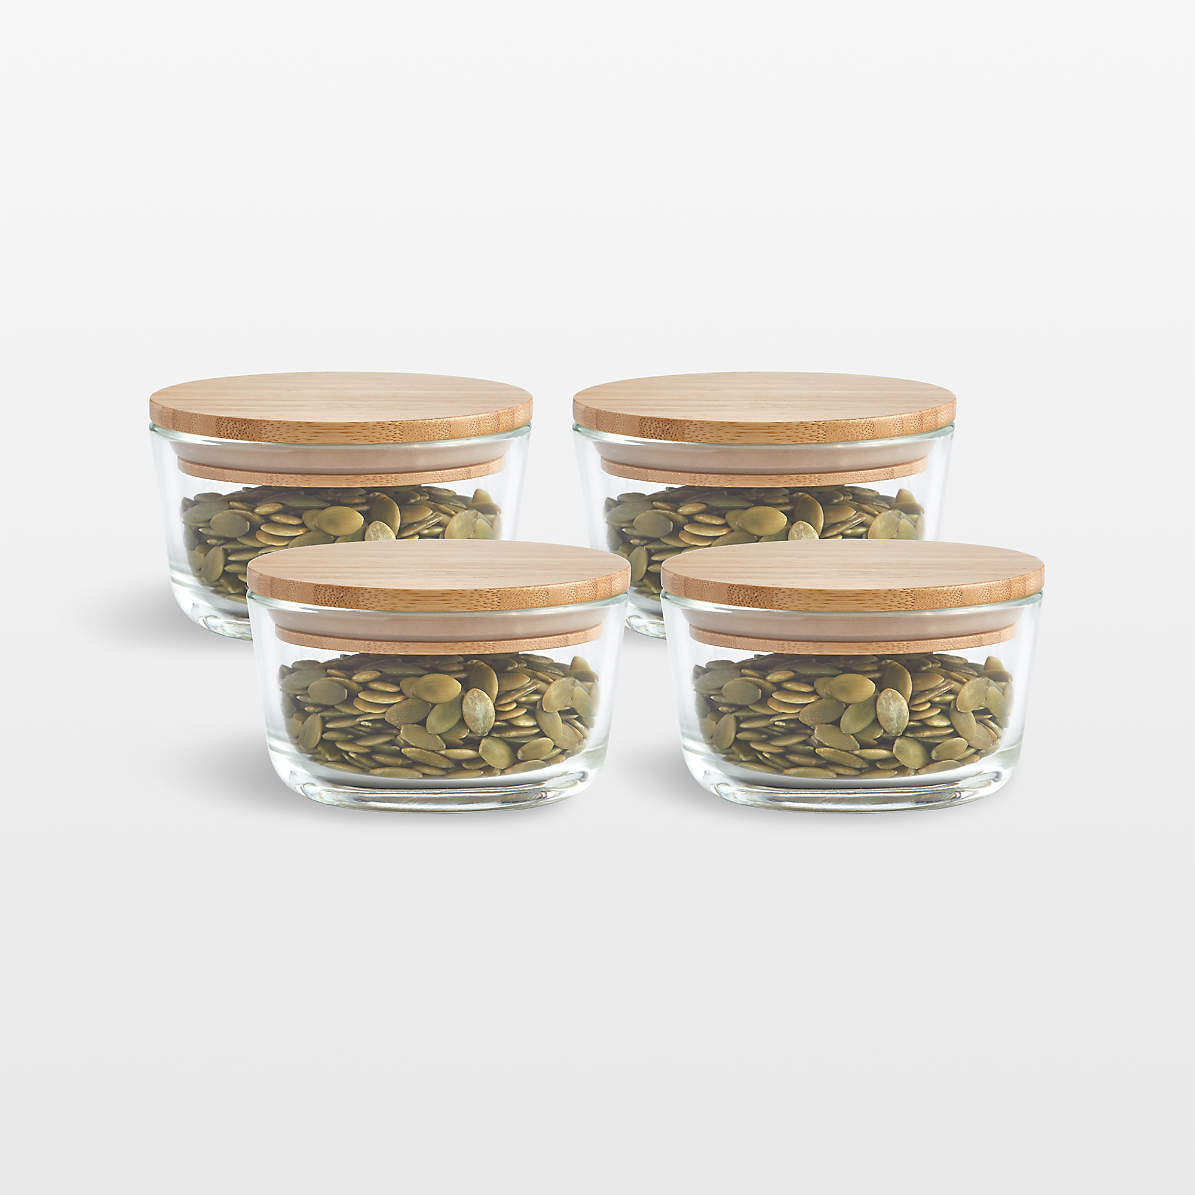 Extra-Large Round Glass Storage Container with Bamboo Lid +